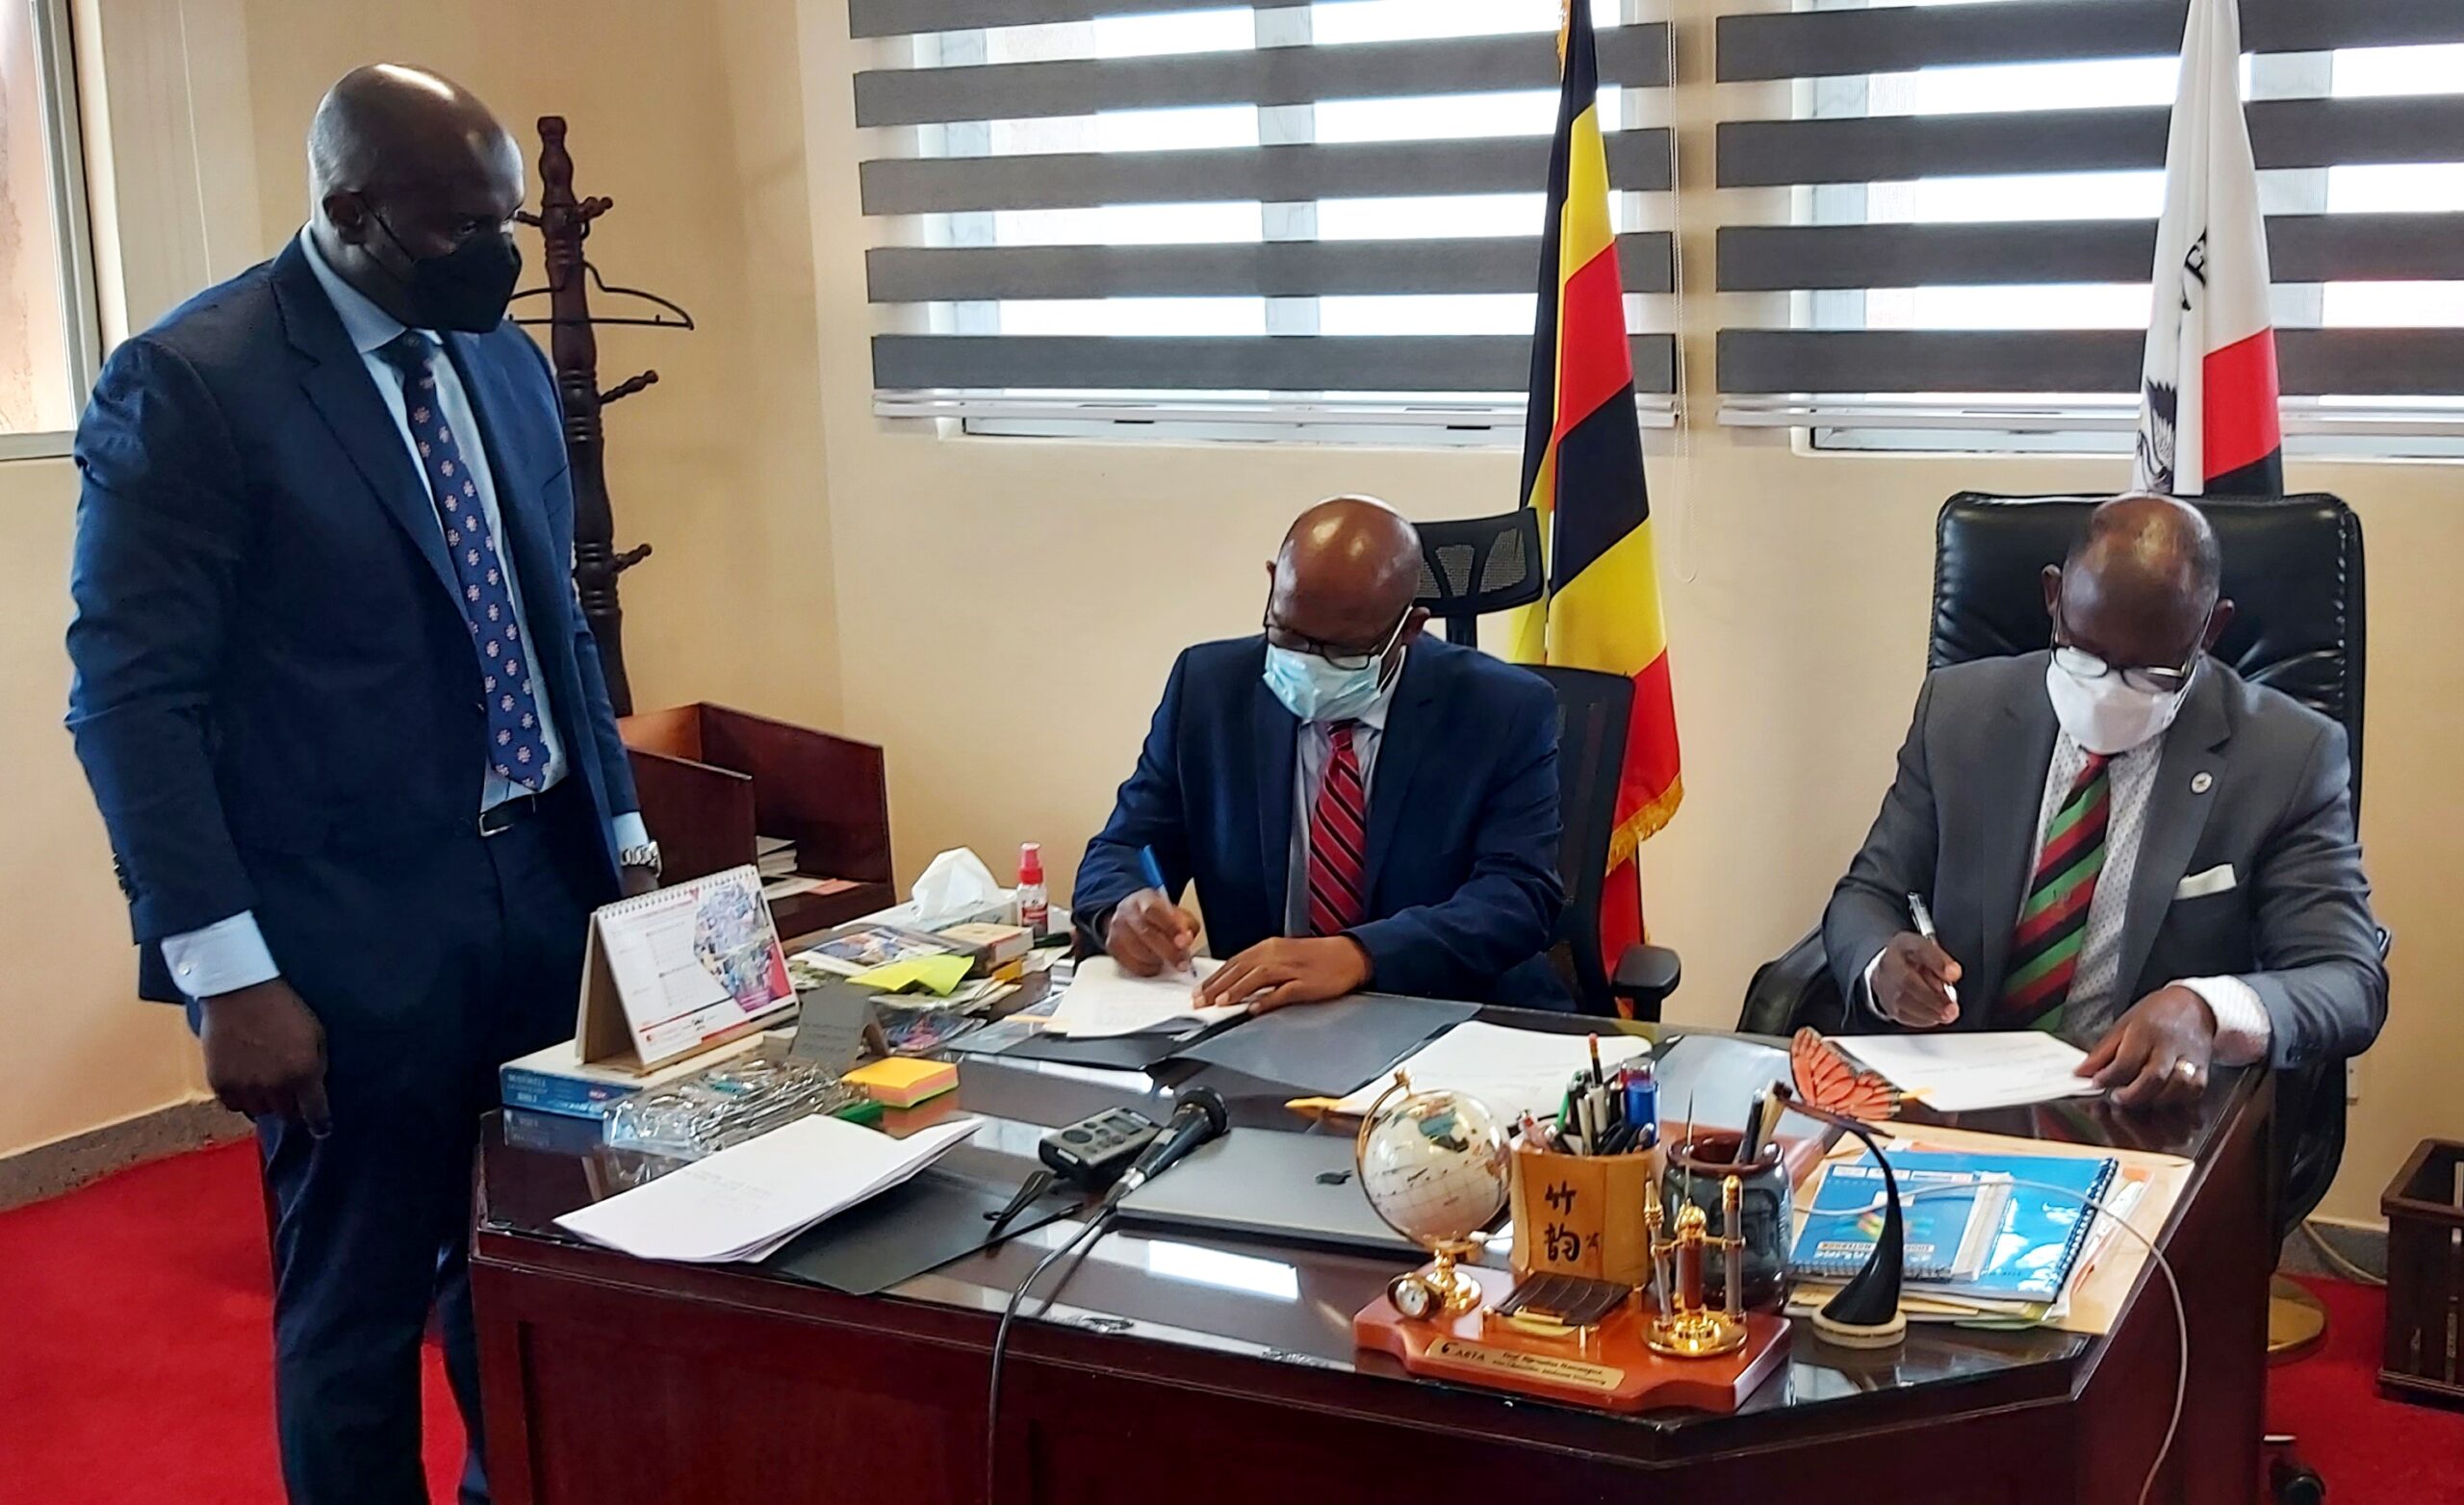 The Vice Chancellor, Prof. Barnabas Nawangwe (R) and Mr. Cephas Birungi Kagyenda (C) sign the MoU on behalf of Makerere University and UHTTI respectively as Director Legal Affairs, Mr. Javason Kamugisha (L) witnesses on 22nd October 2021, CTF1, Makerere University.